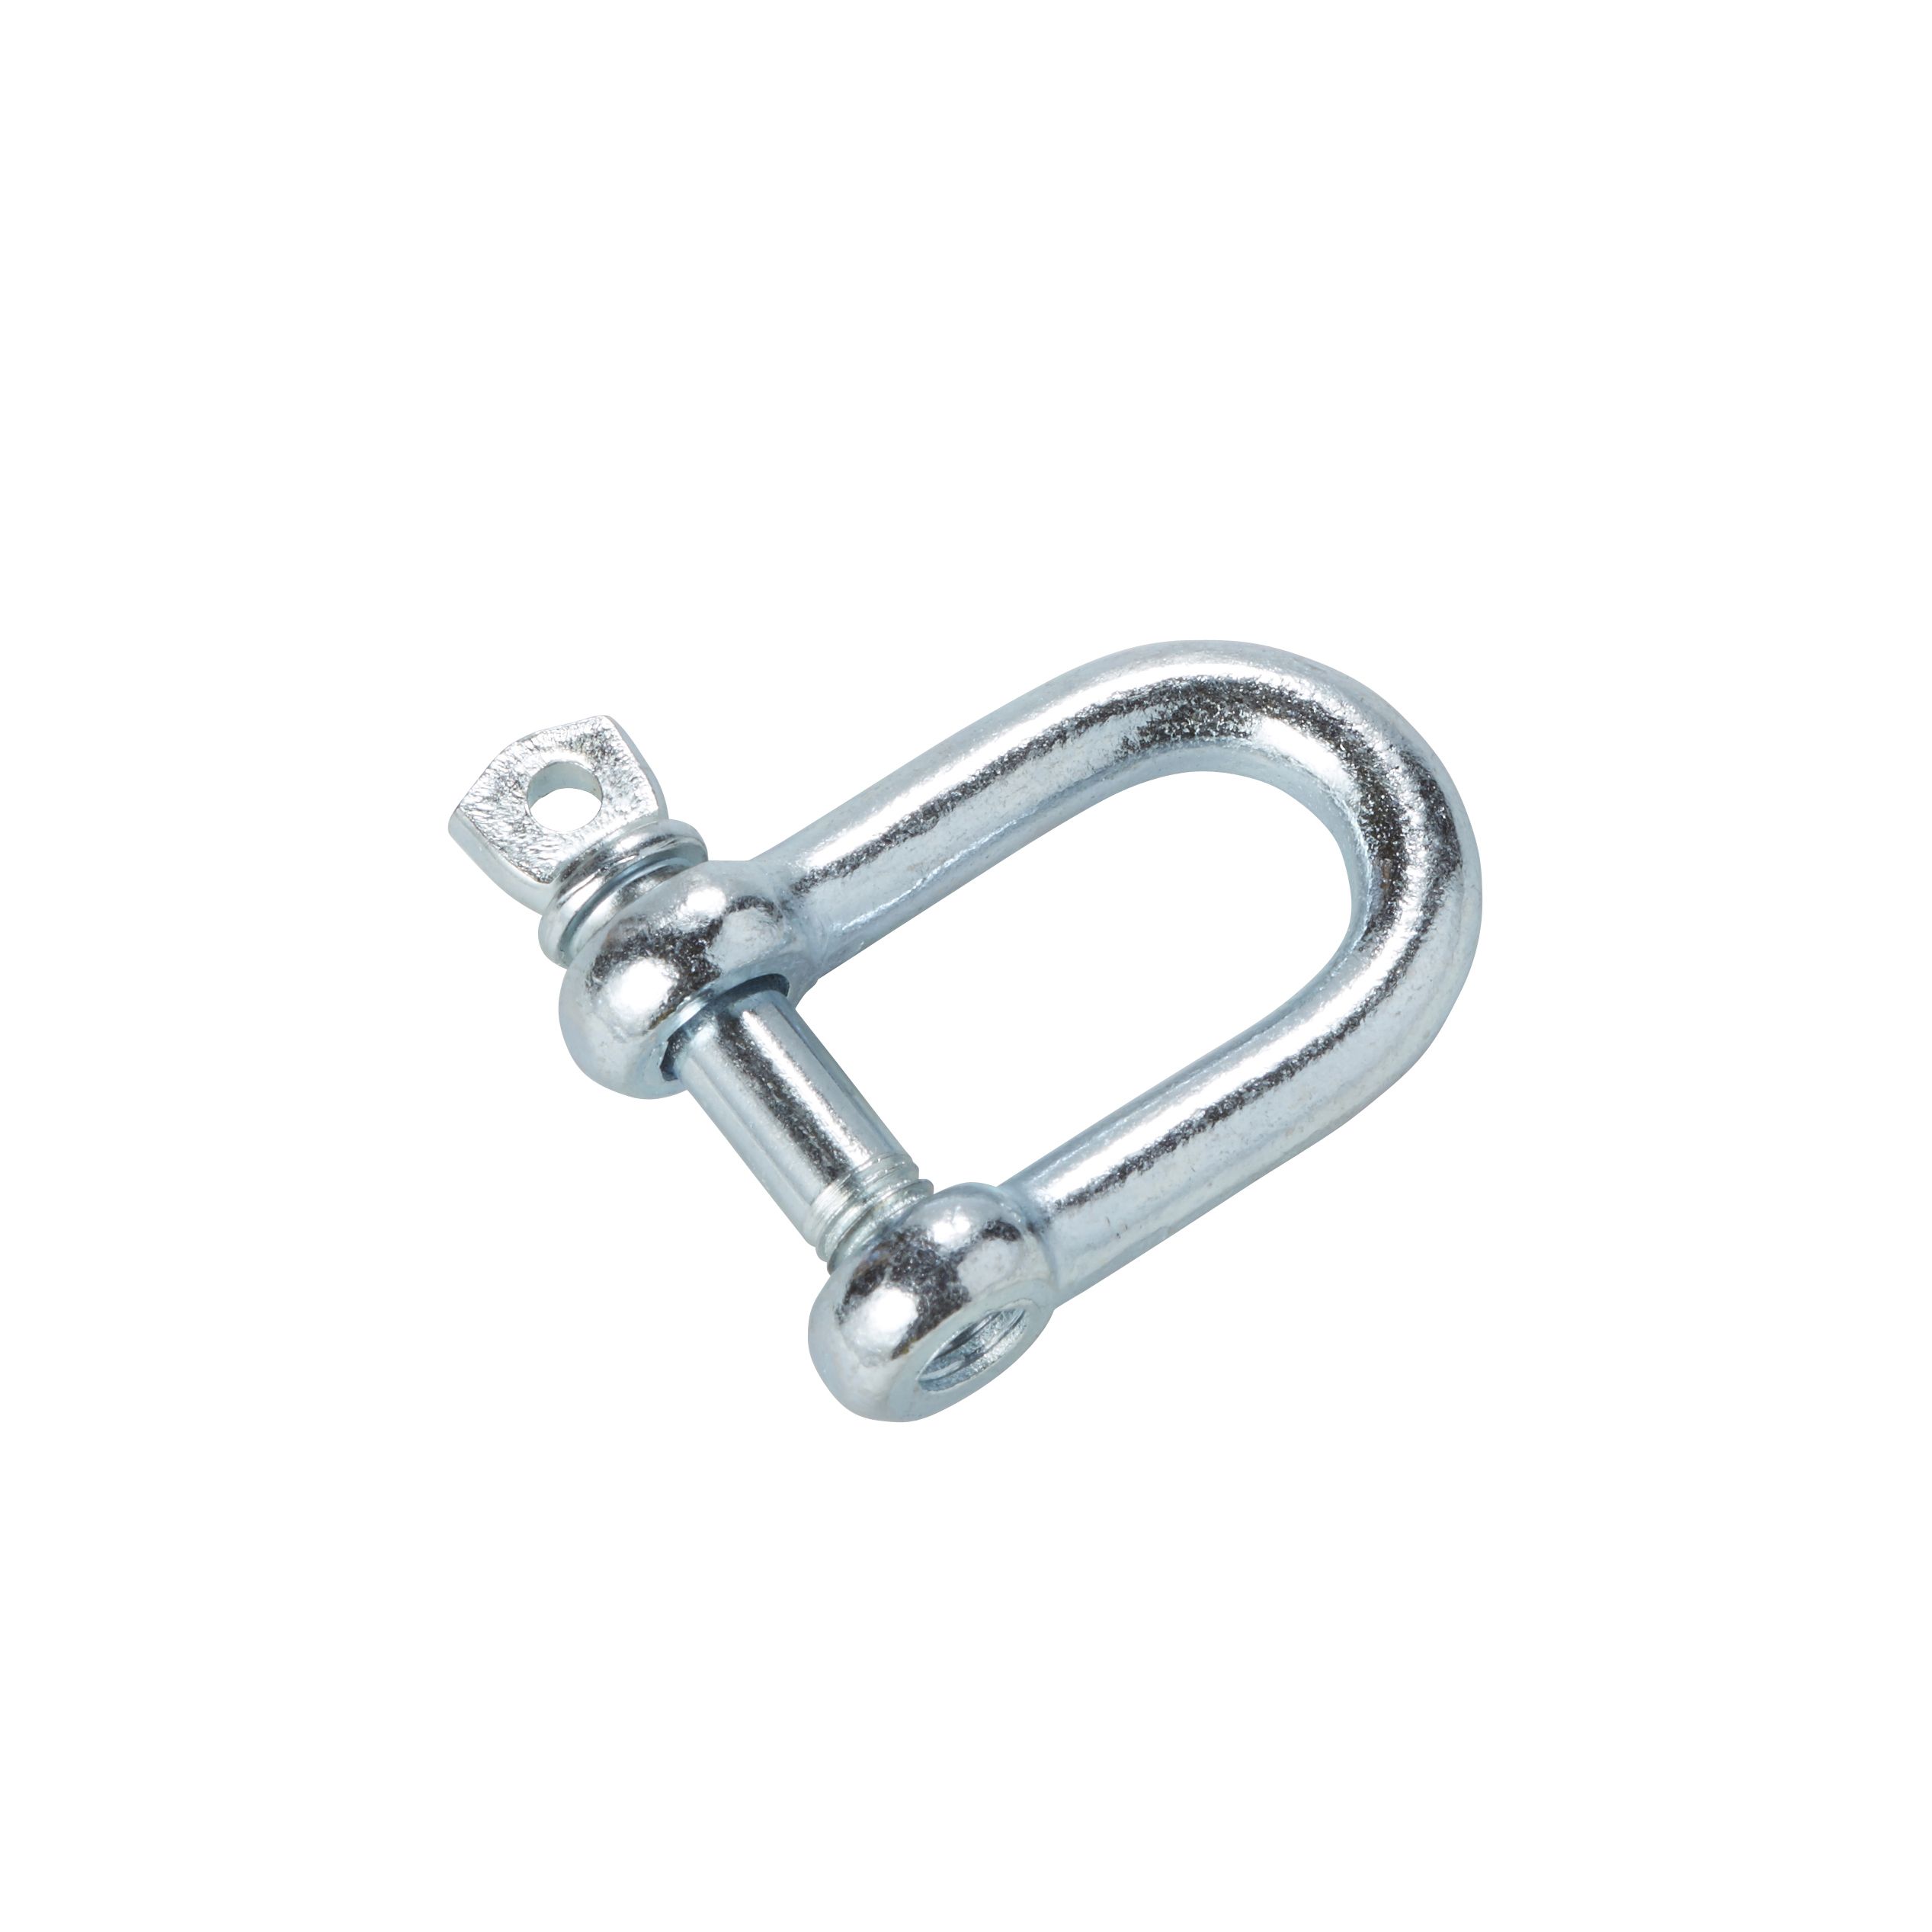 Diall Steel D-shackle (Dia)5mm